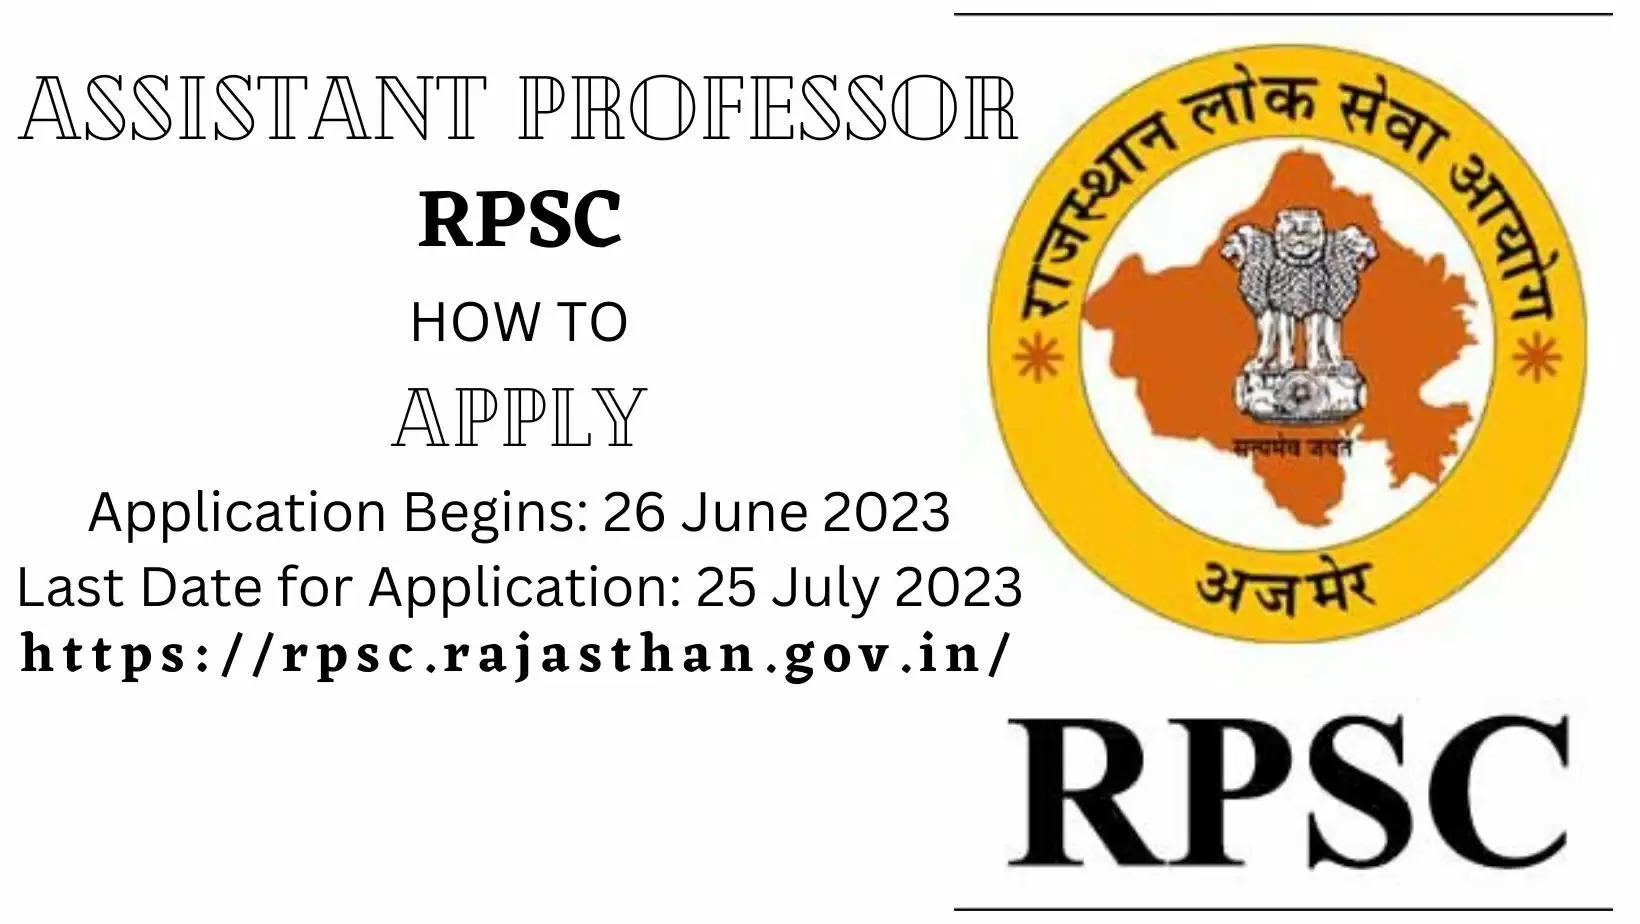 RPSC Applications for Assistant Professor examinations How to Apply